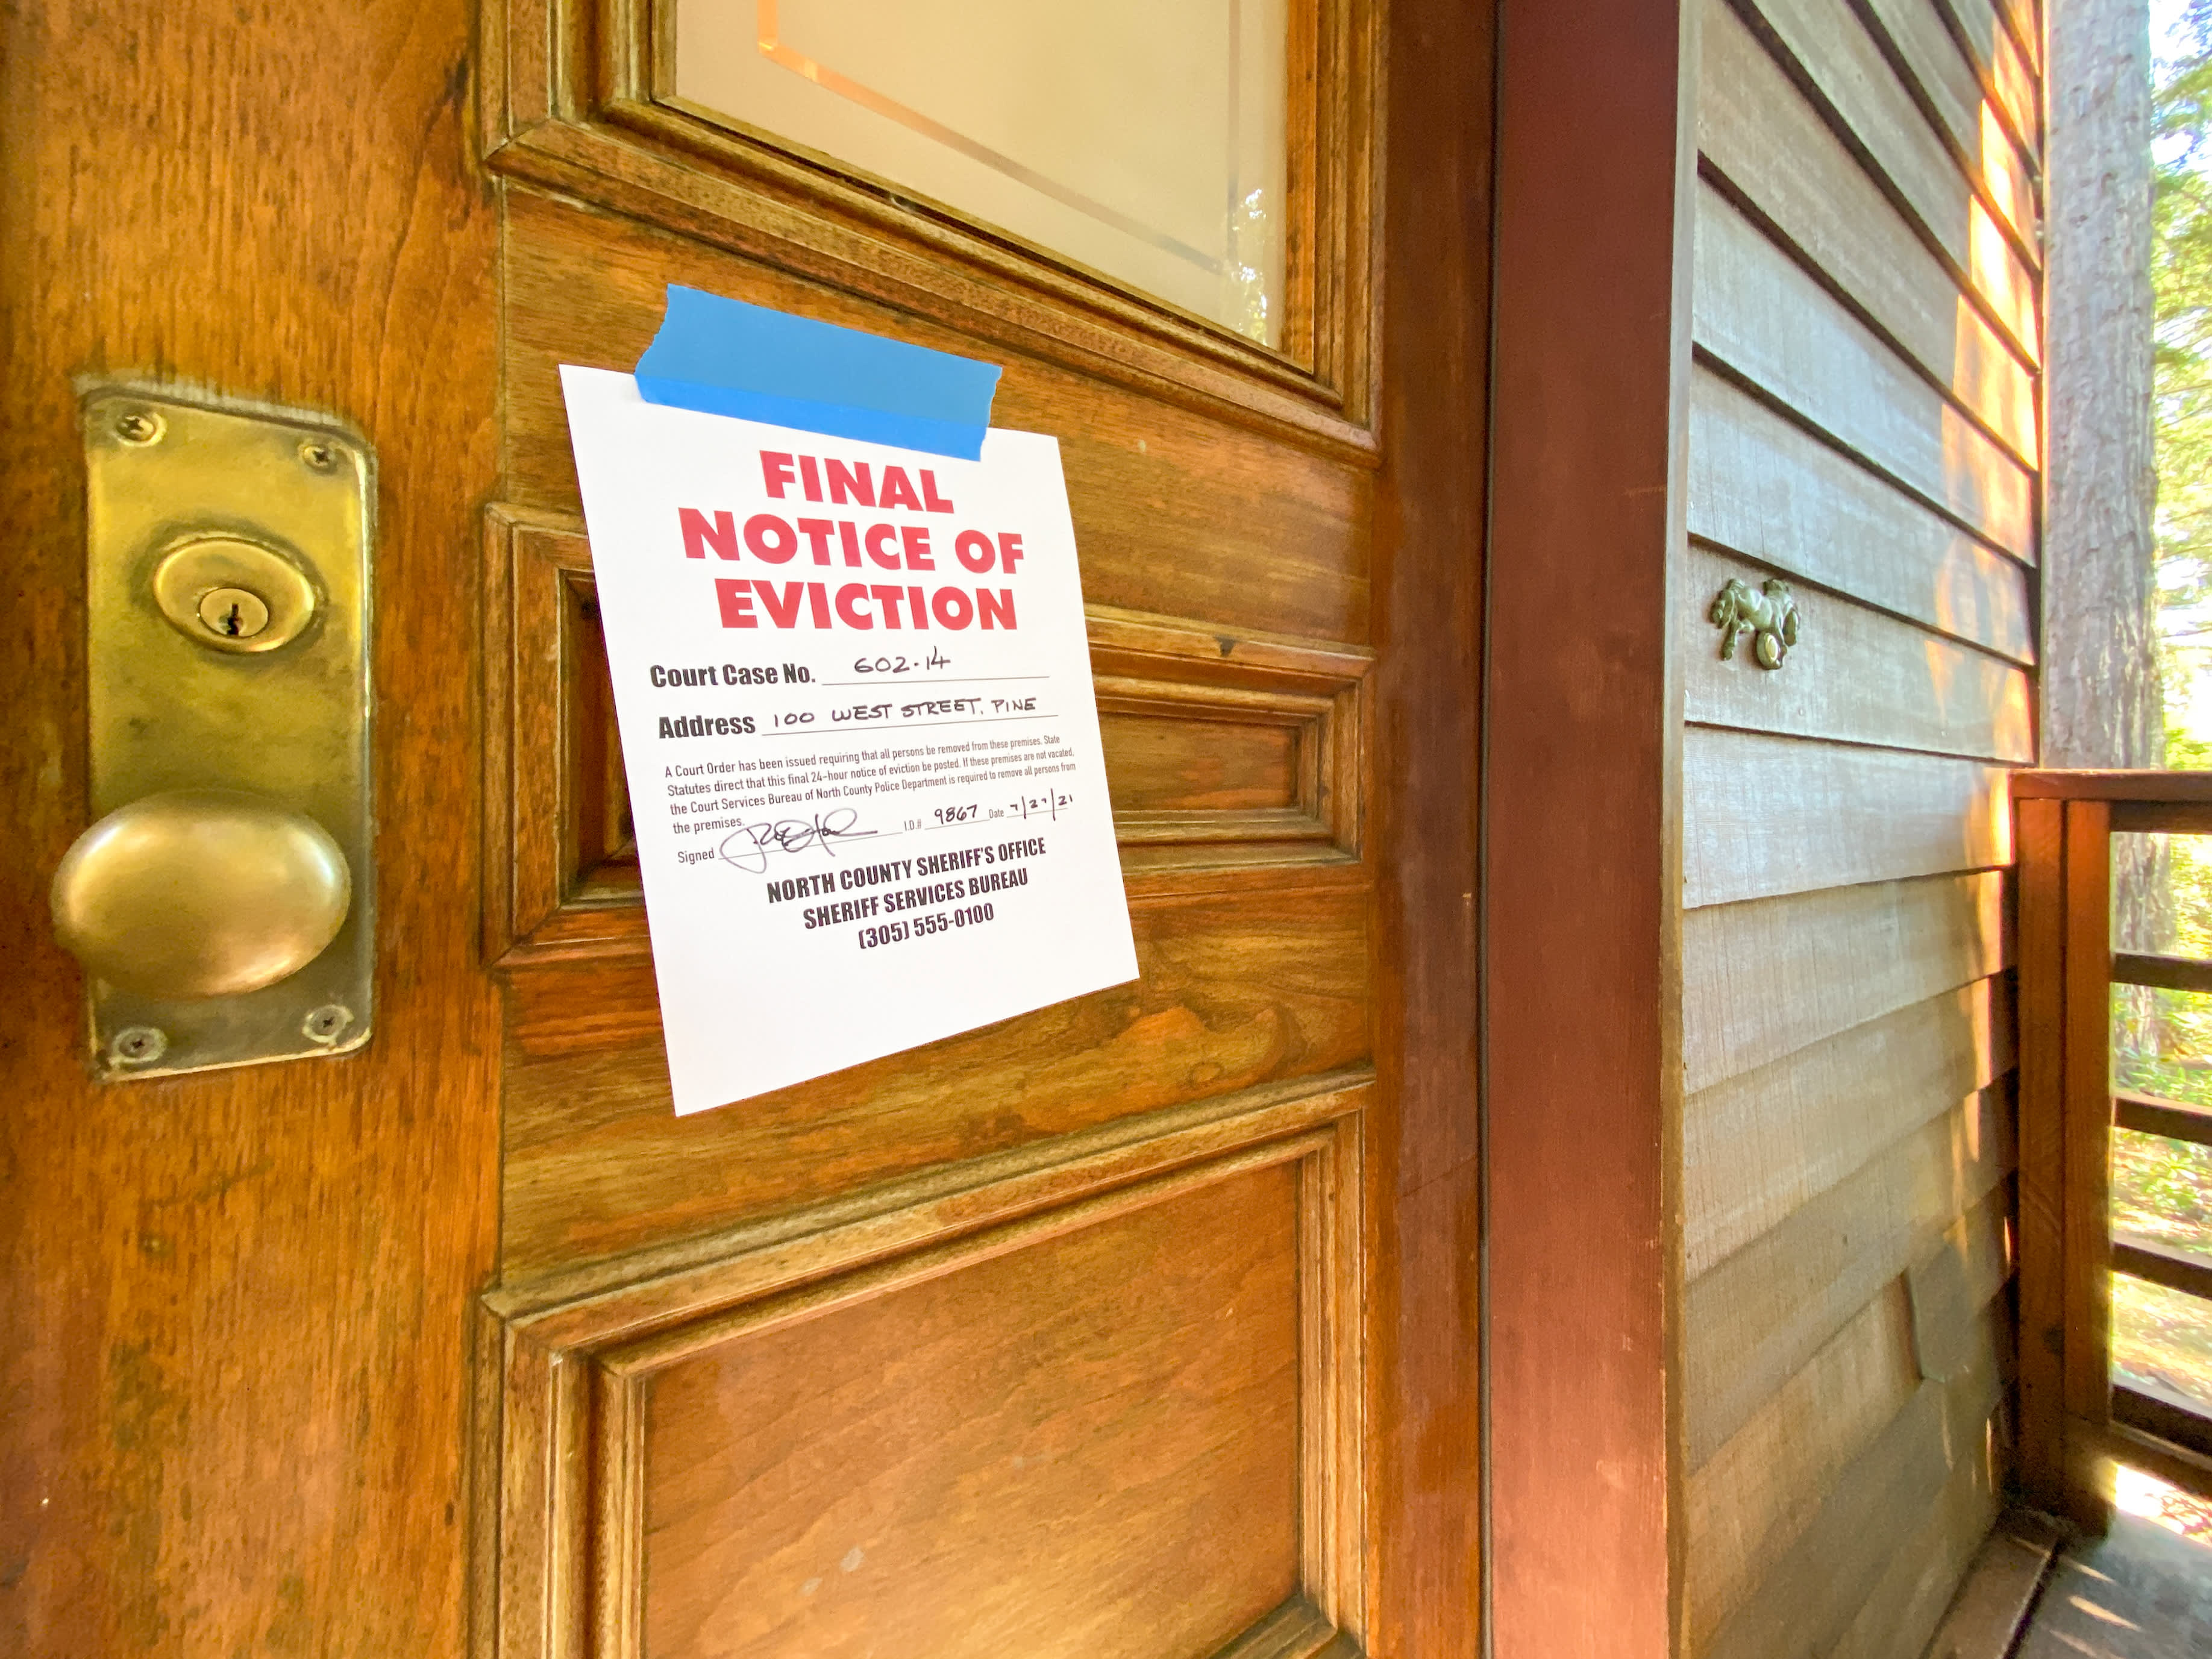 Despite national protection expiring, some states will continue banning eviction..